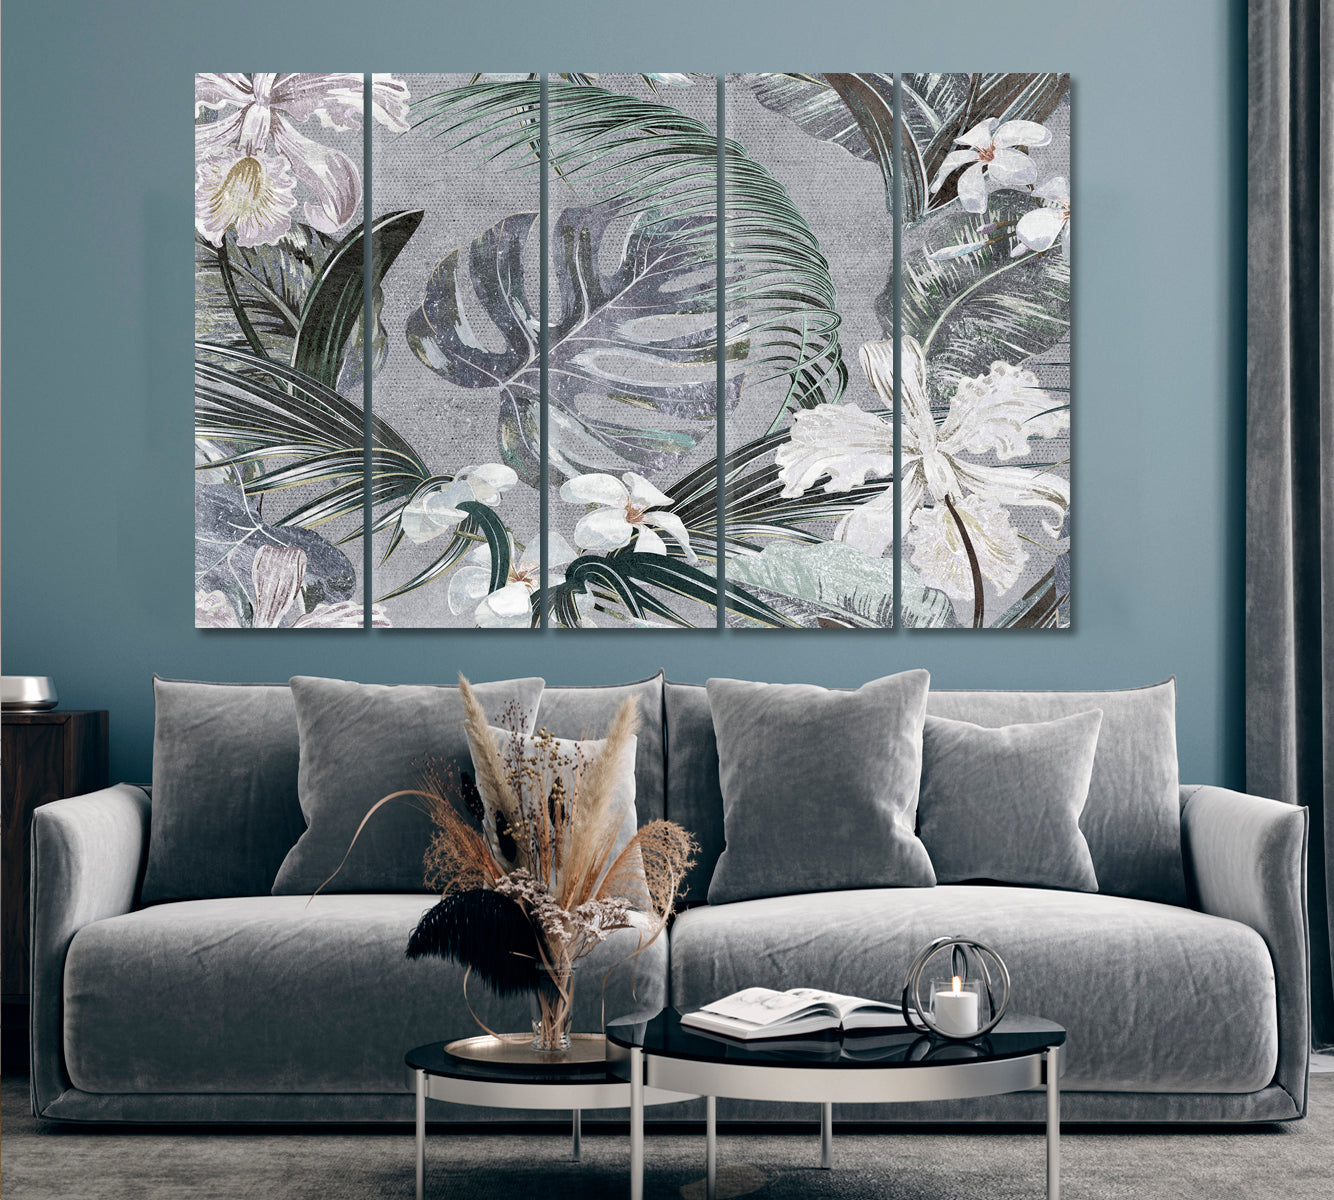 Gray Tropical Leaves Abstract Floral Poster Floral & Botanical Split Art Artesty 5 panels 36" x 24" 